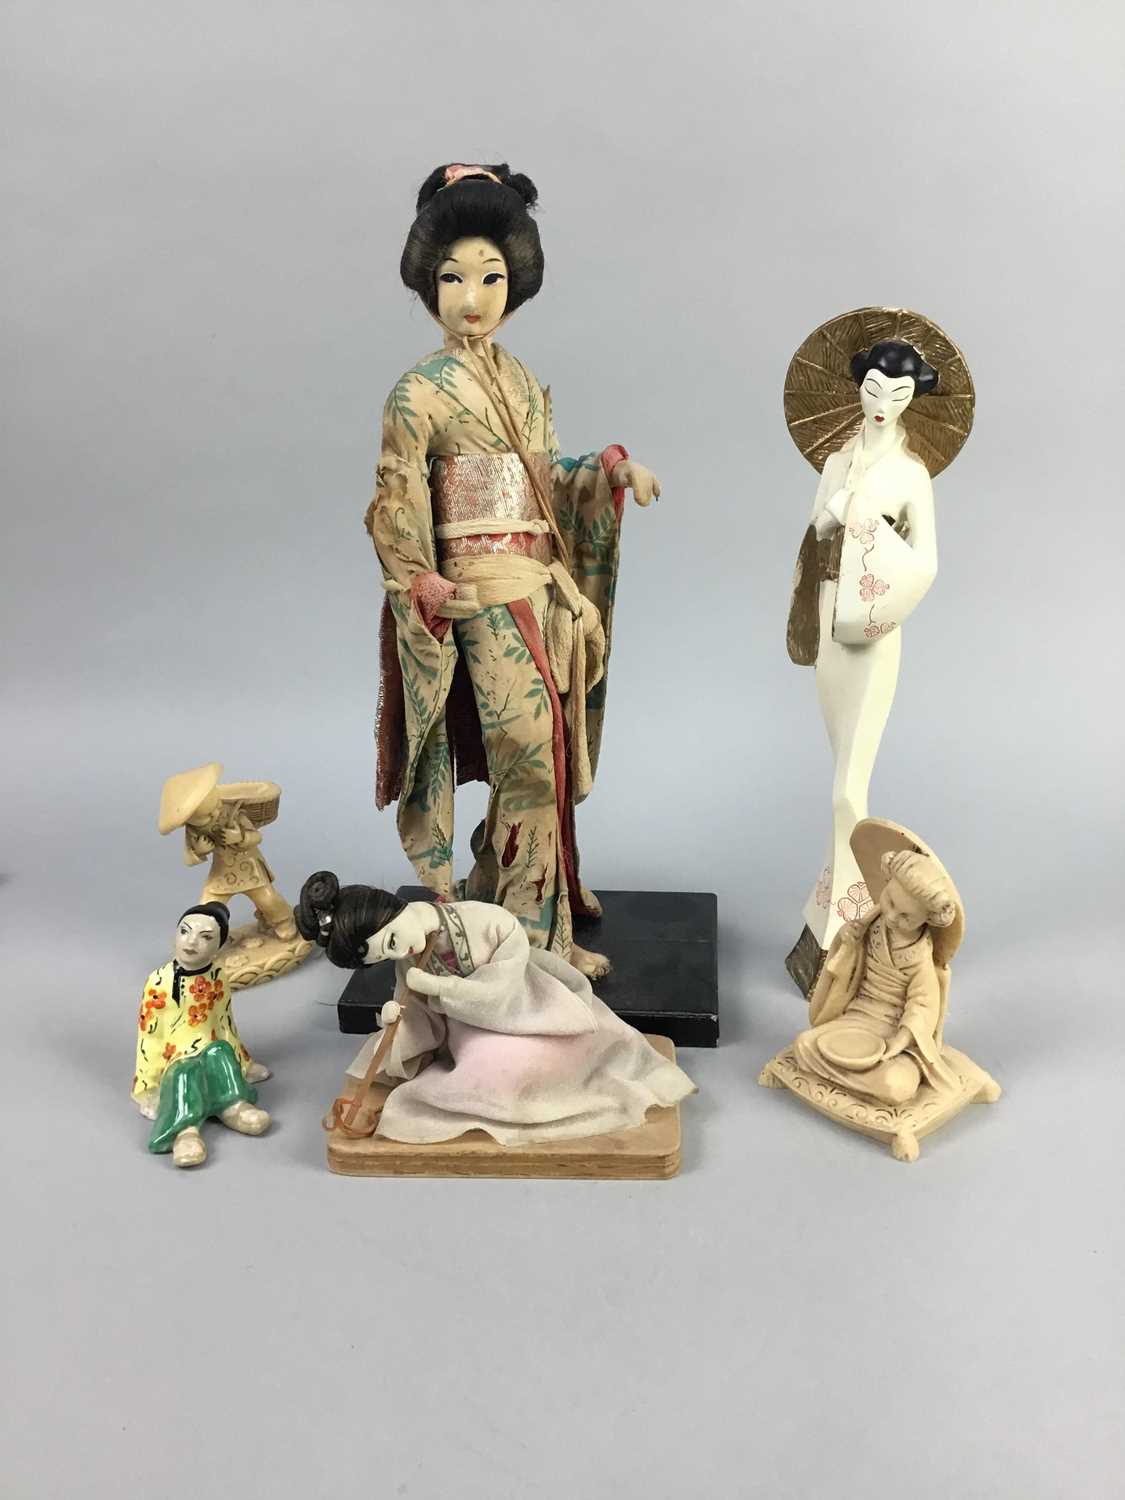 Lot 72 - A JAPANESE EGGSHELL TEA SERVICE, JAPANESE DOLLS AND OTHER ITEMS